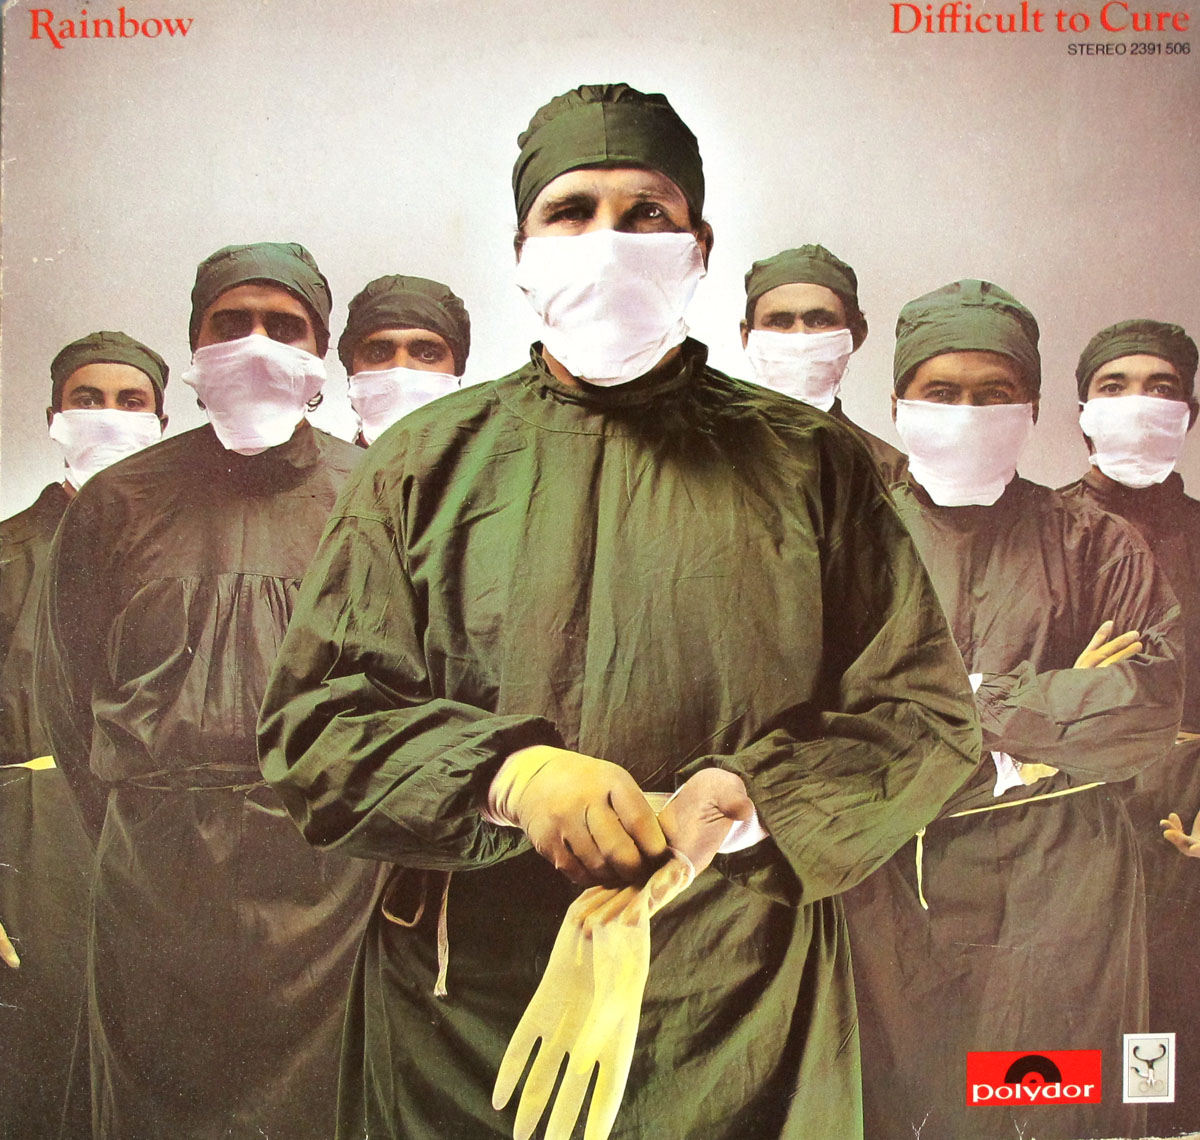 High Resolution Photos of rainbow difficult to cure polydor germany 